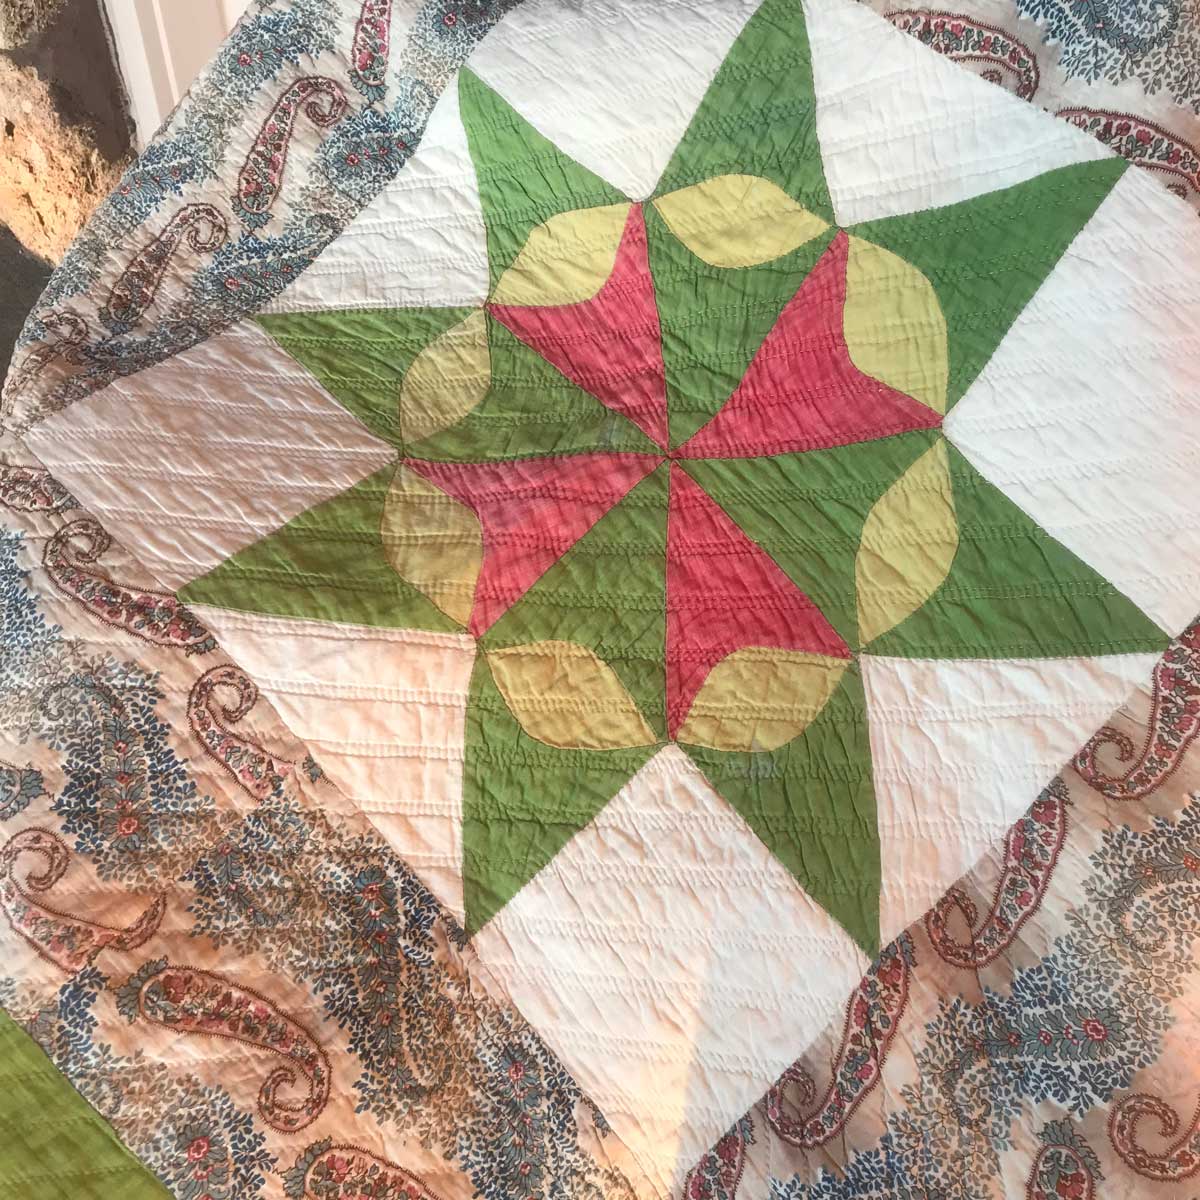 a rocky road quilt